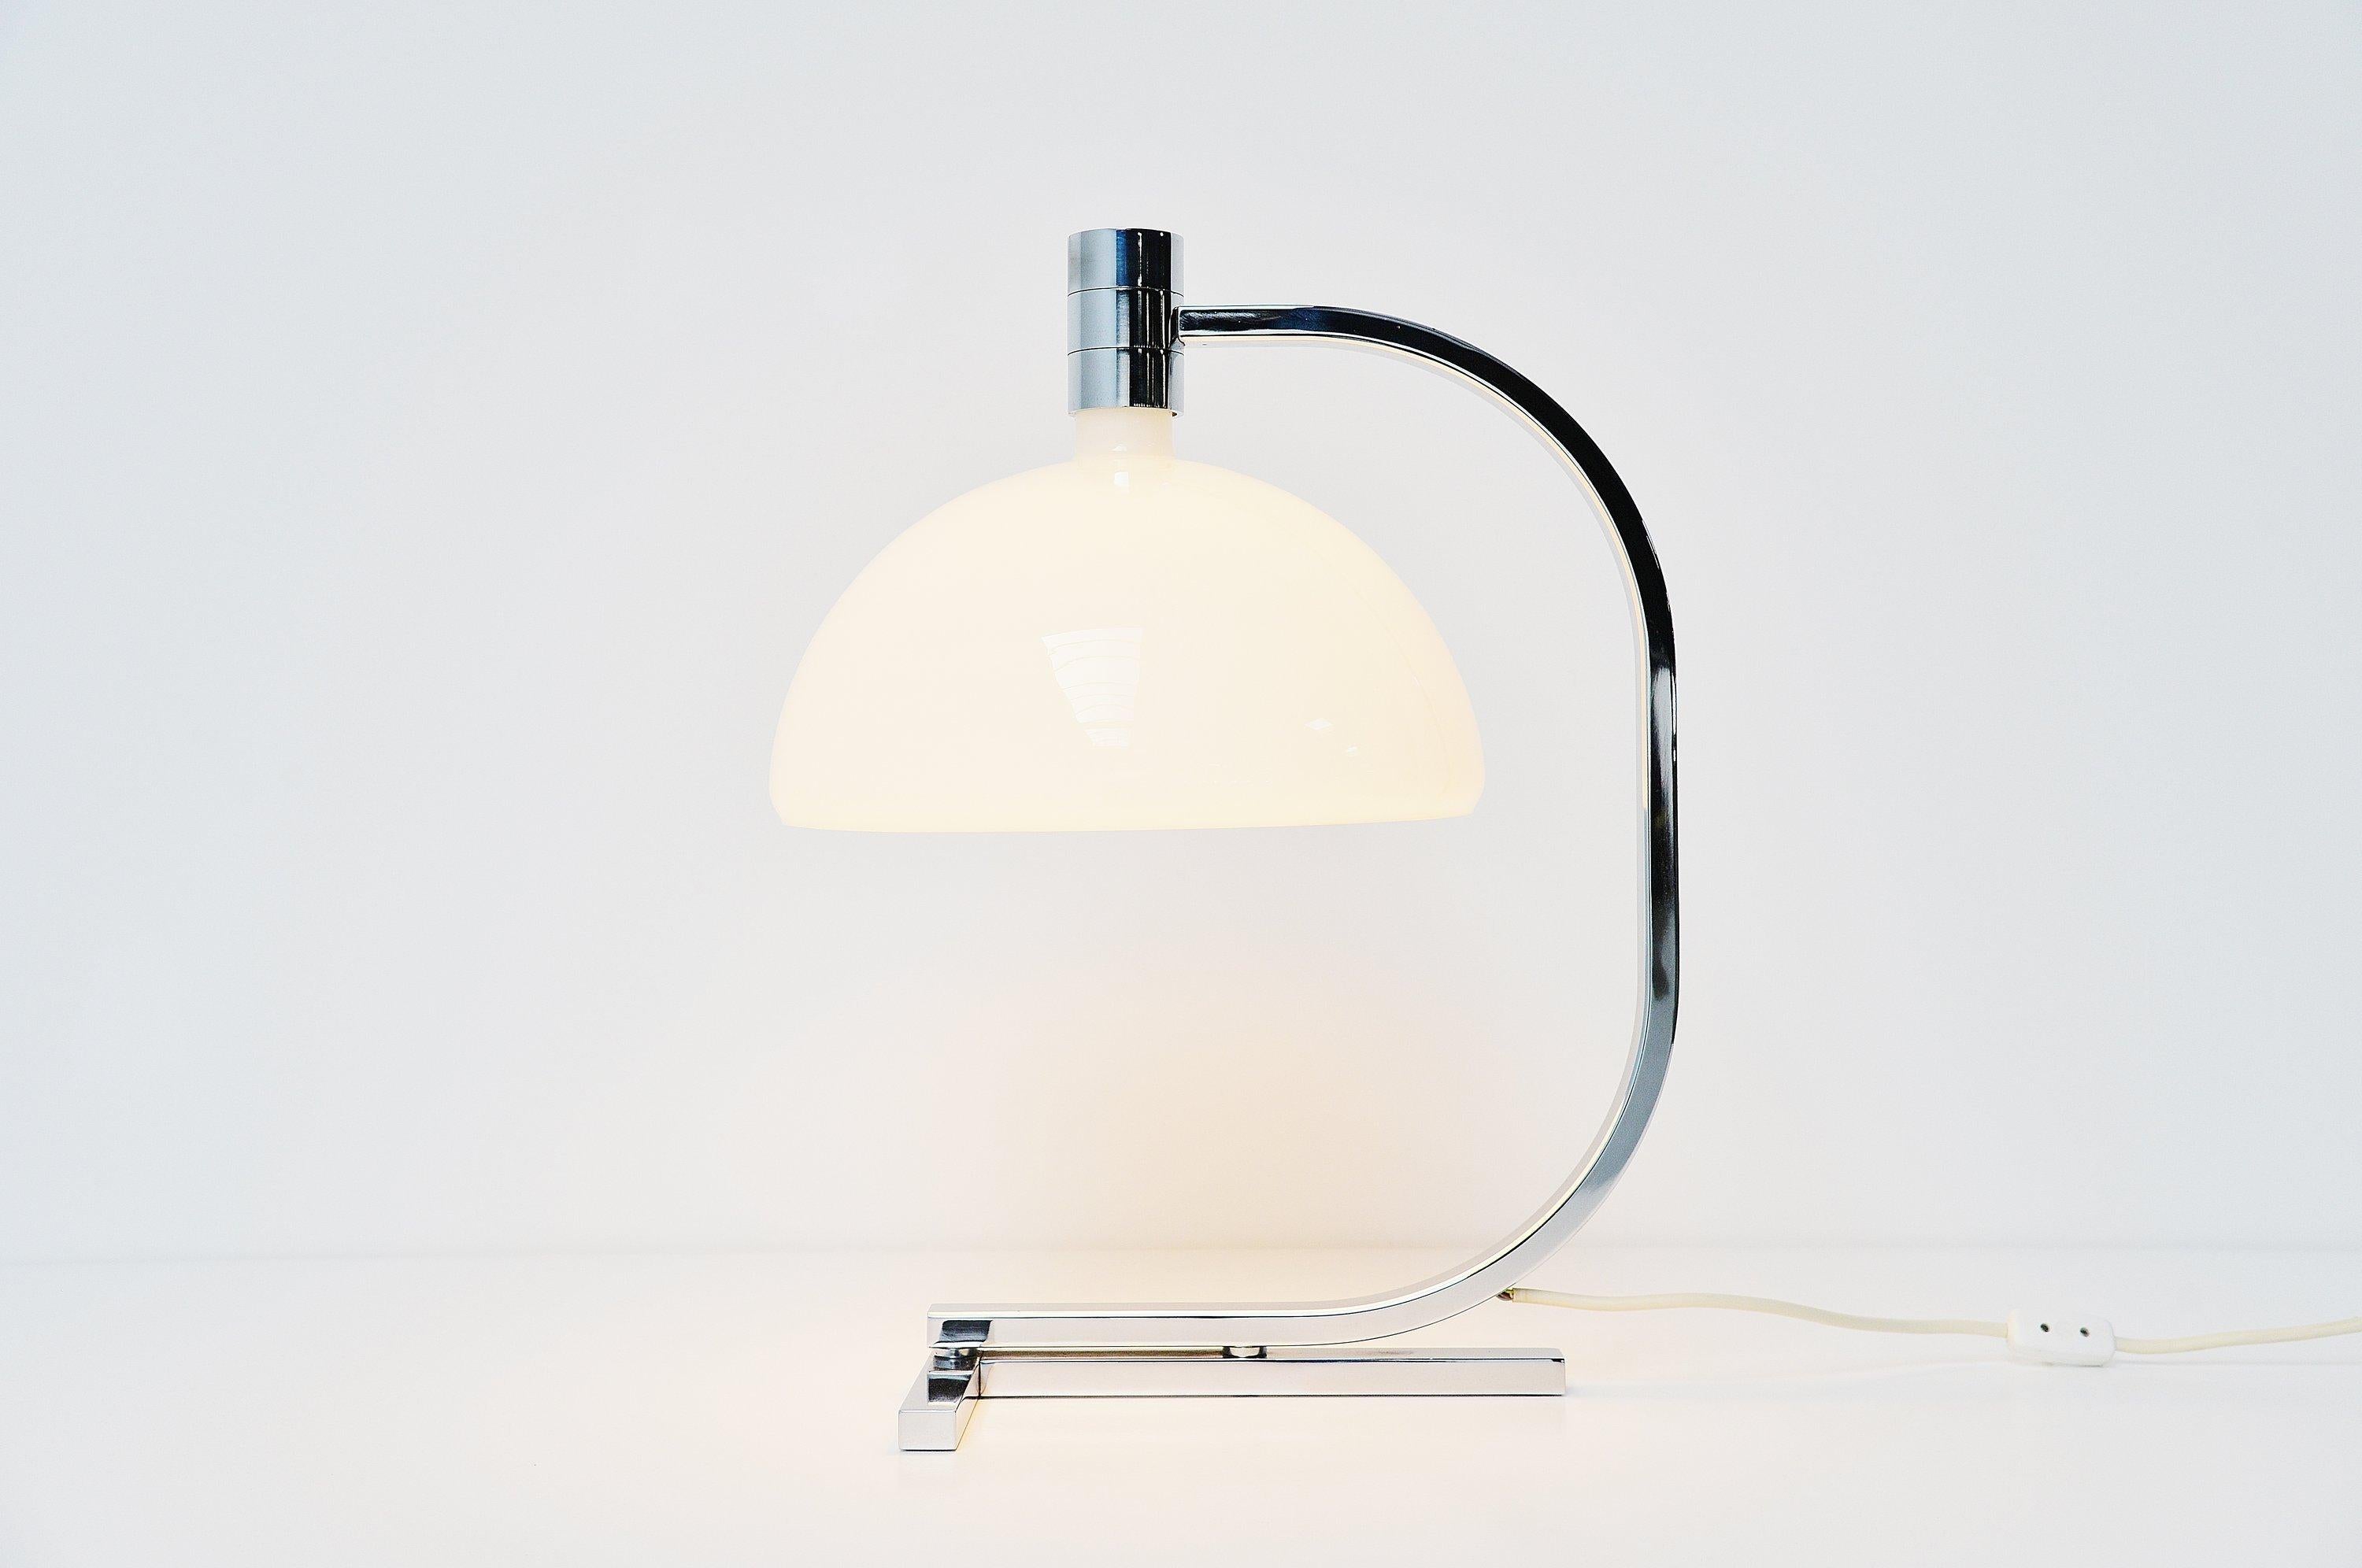 Table lamp model AS1C from the AM/AS series designed by Franco Albini and Franca Helg and manufactures by Sirrah, Italy, 1969. This large shaped table lamp has a chrome plated metal frame and a white glass opaline shade. The AM/AS series was a large